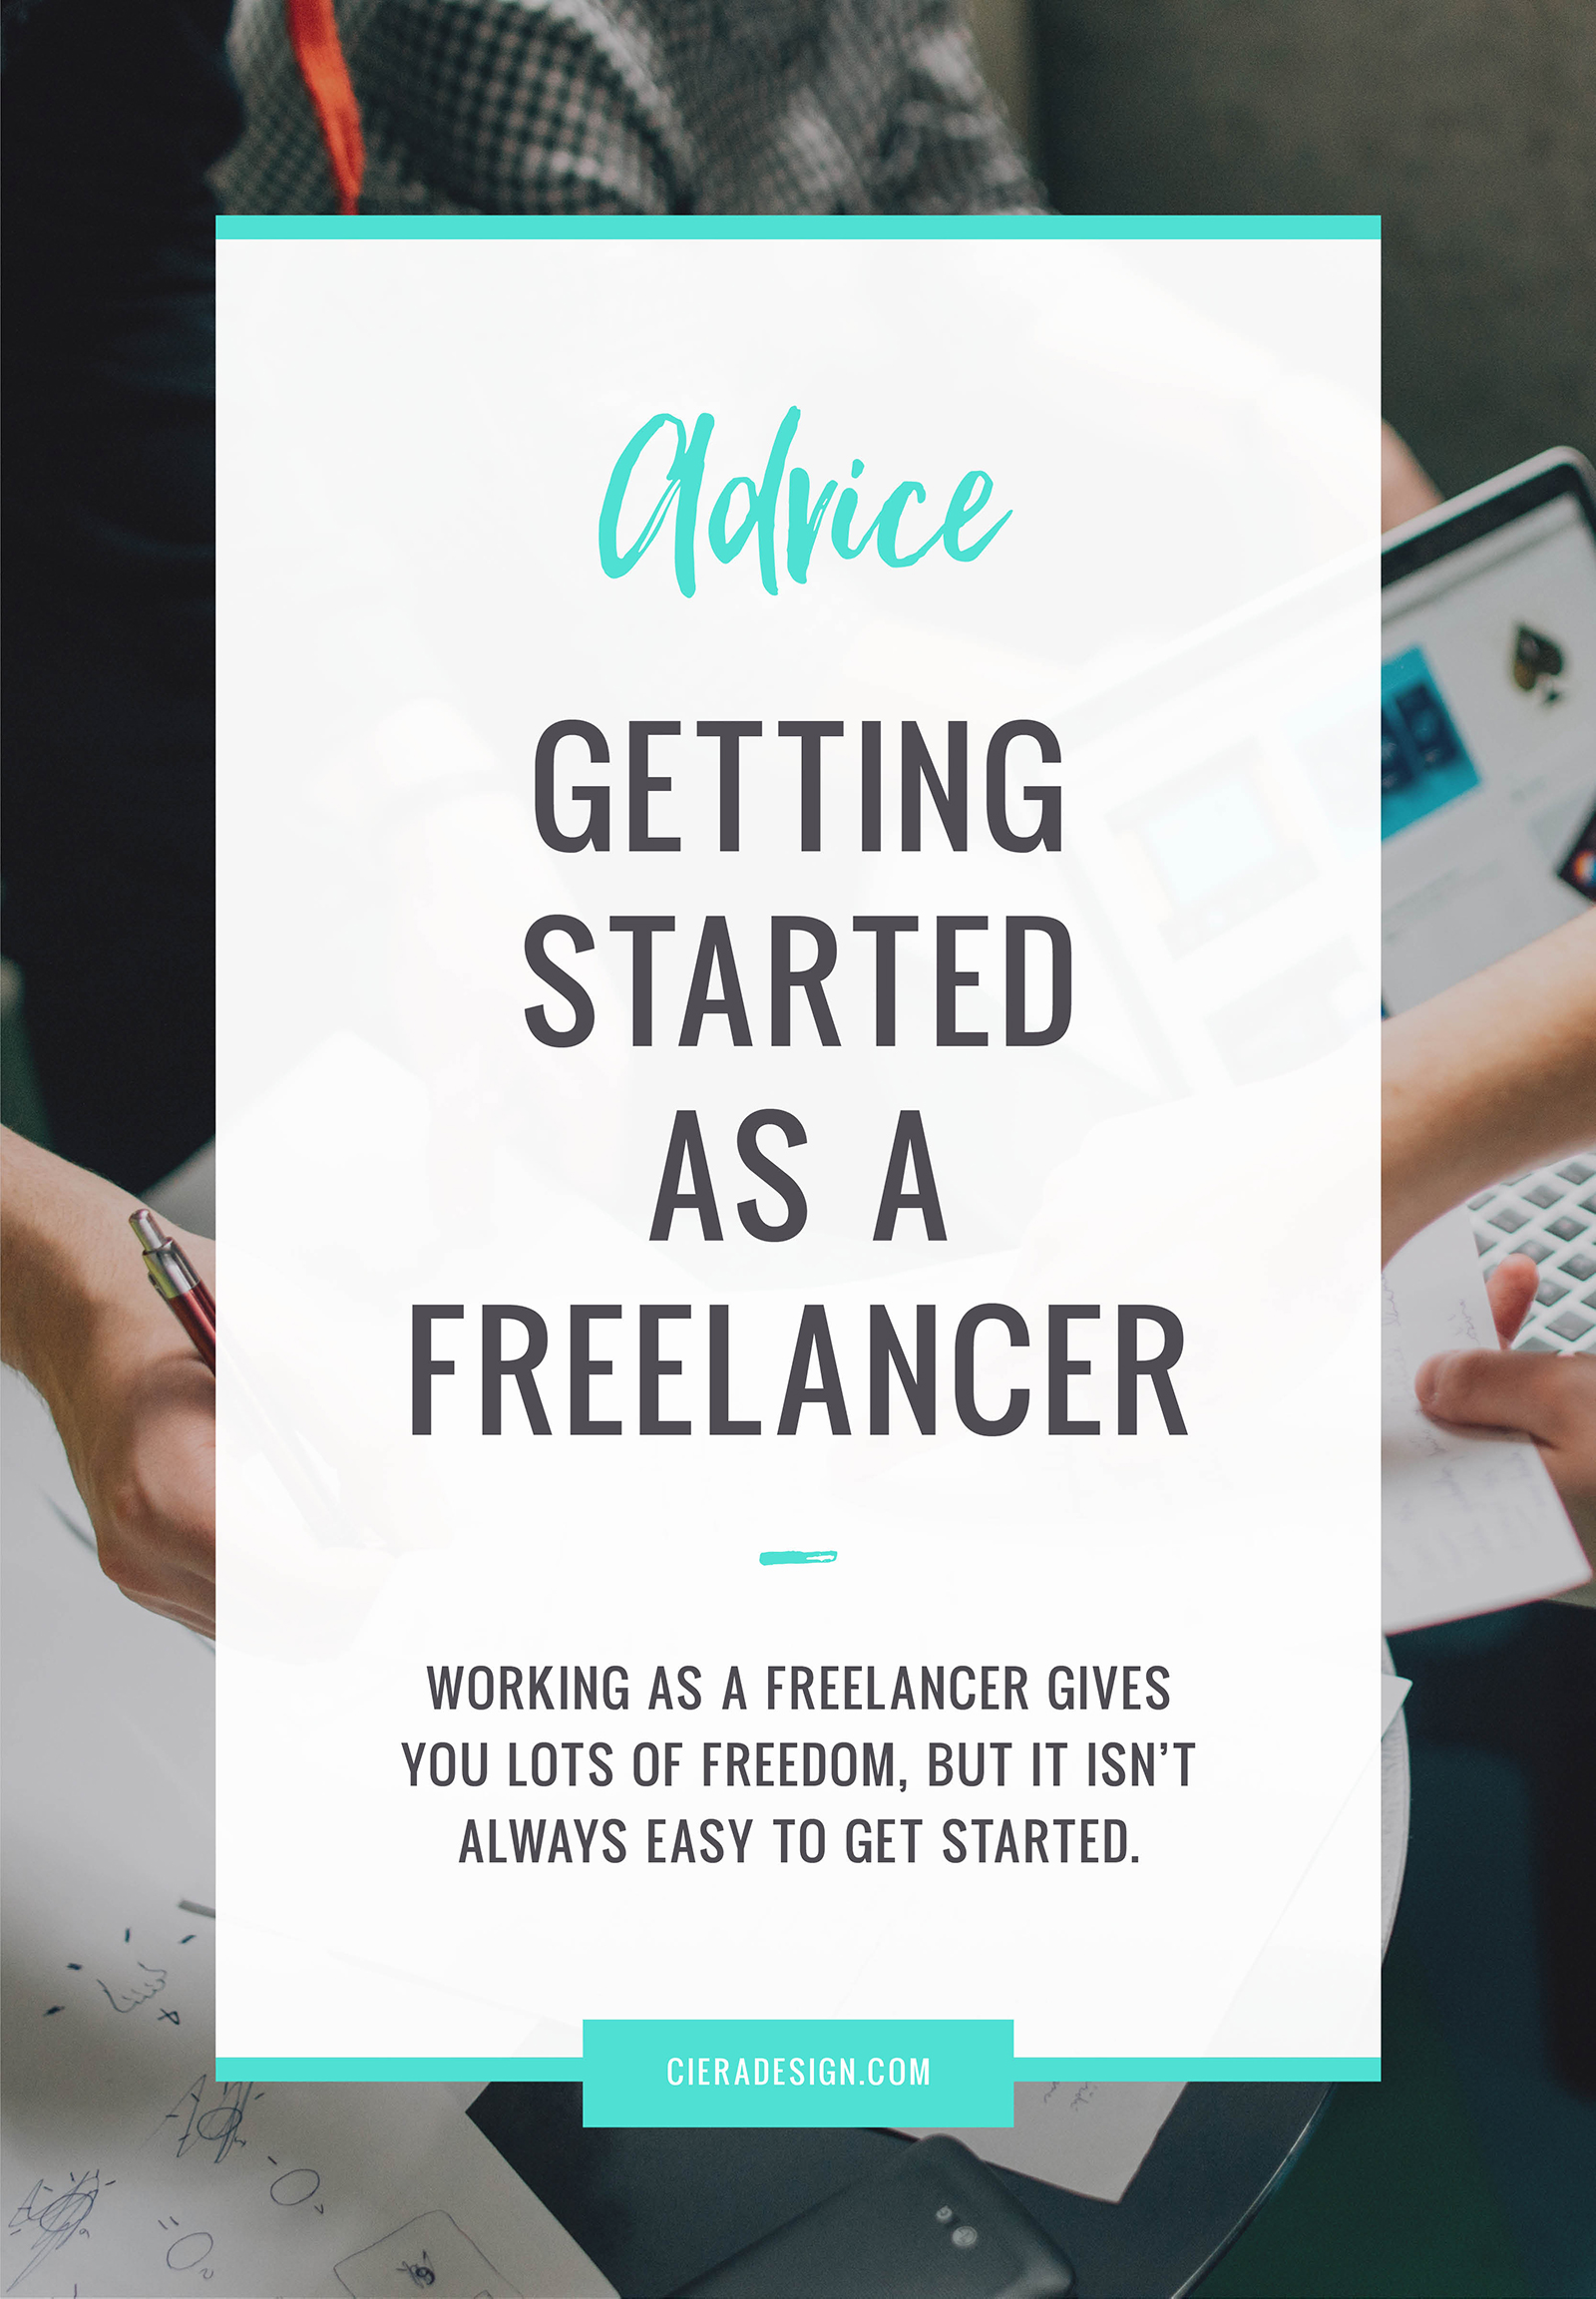 Working as a freelancer gives you lots of freedom, but it isn’t always easy to get started.